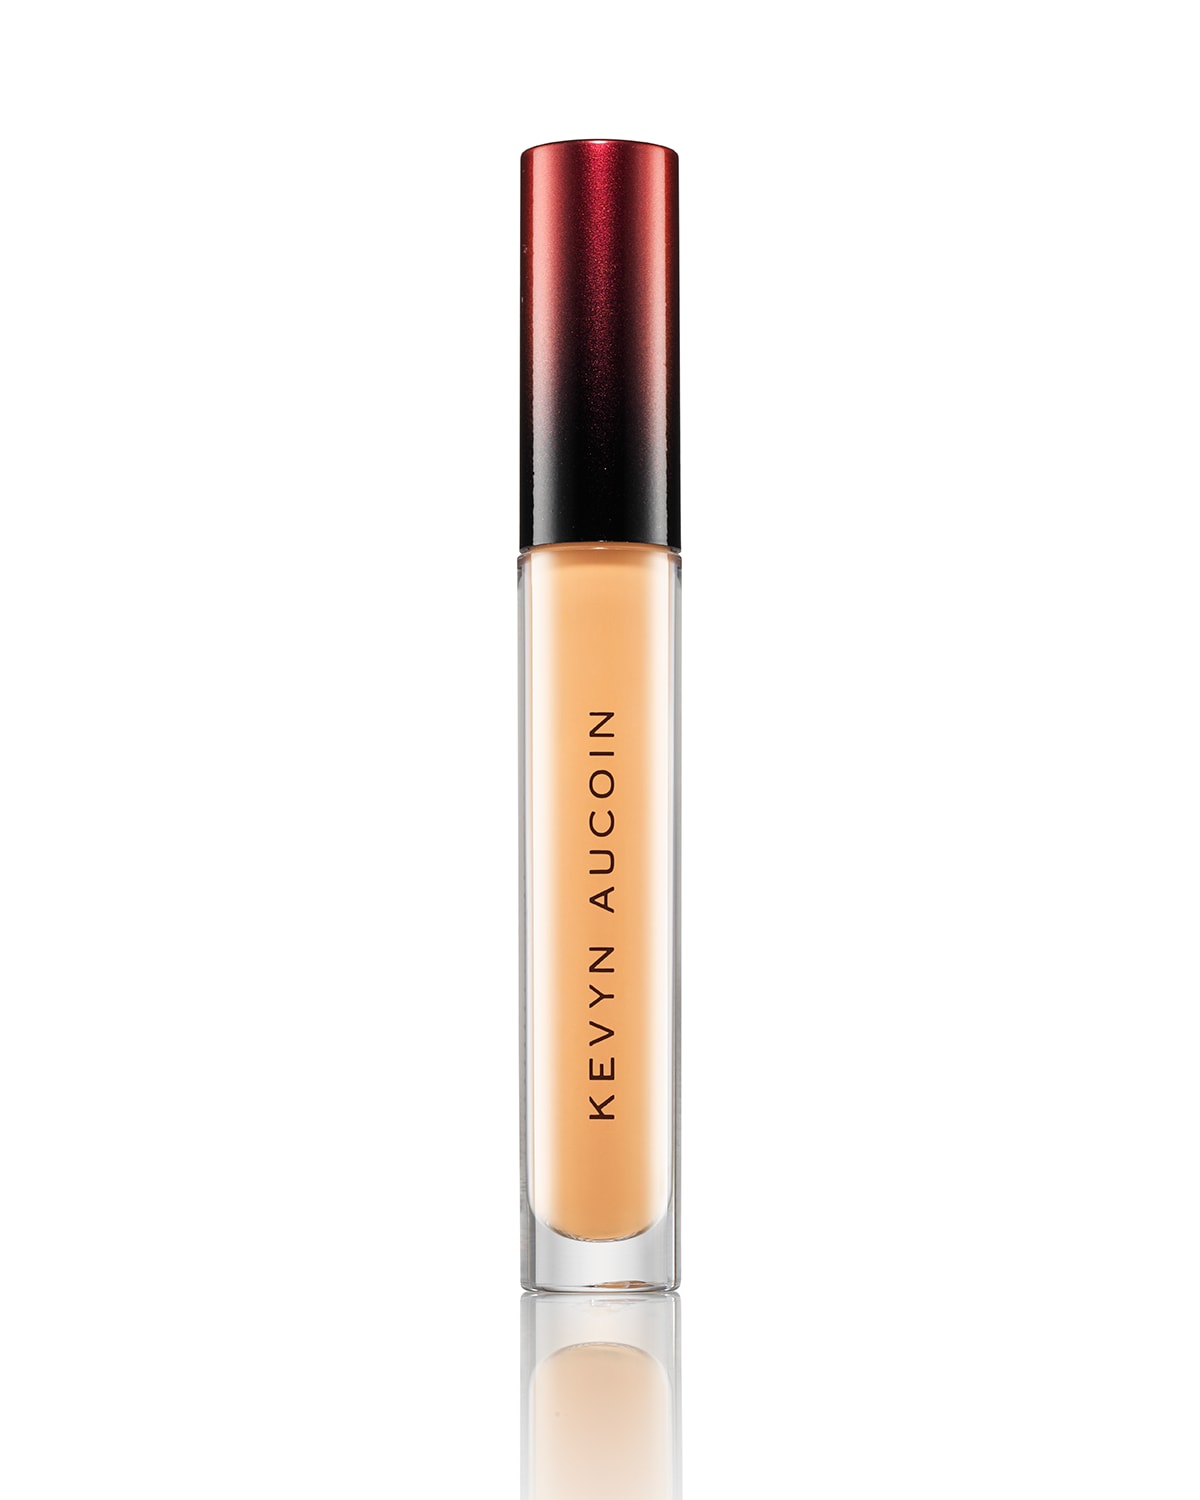 Kevyn Aucoin The Etherealist Super Natural Concealer, 0.1 oz.